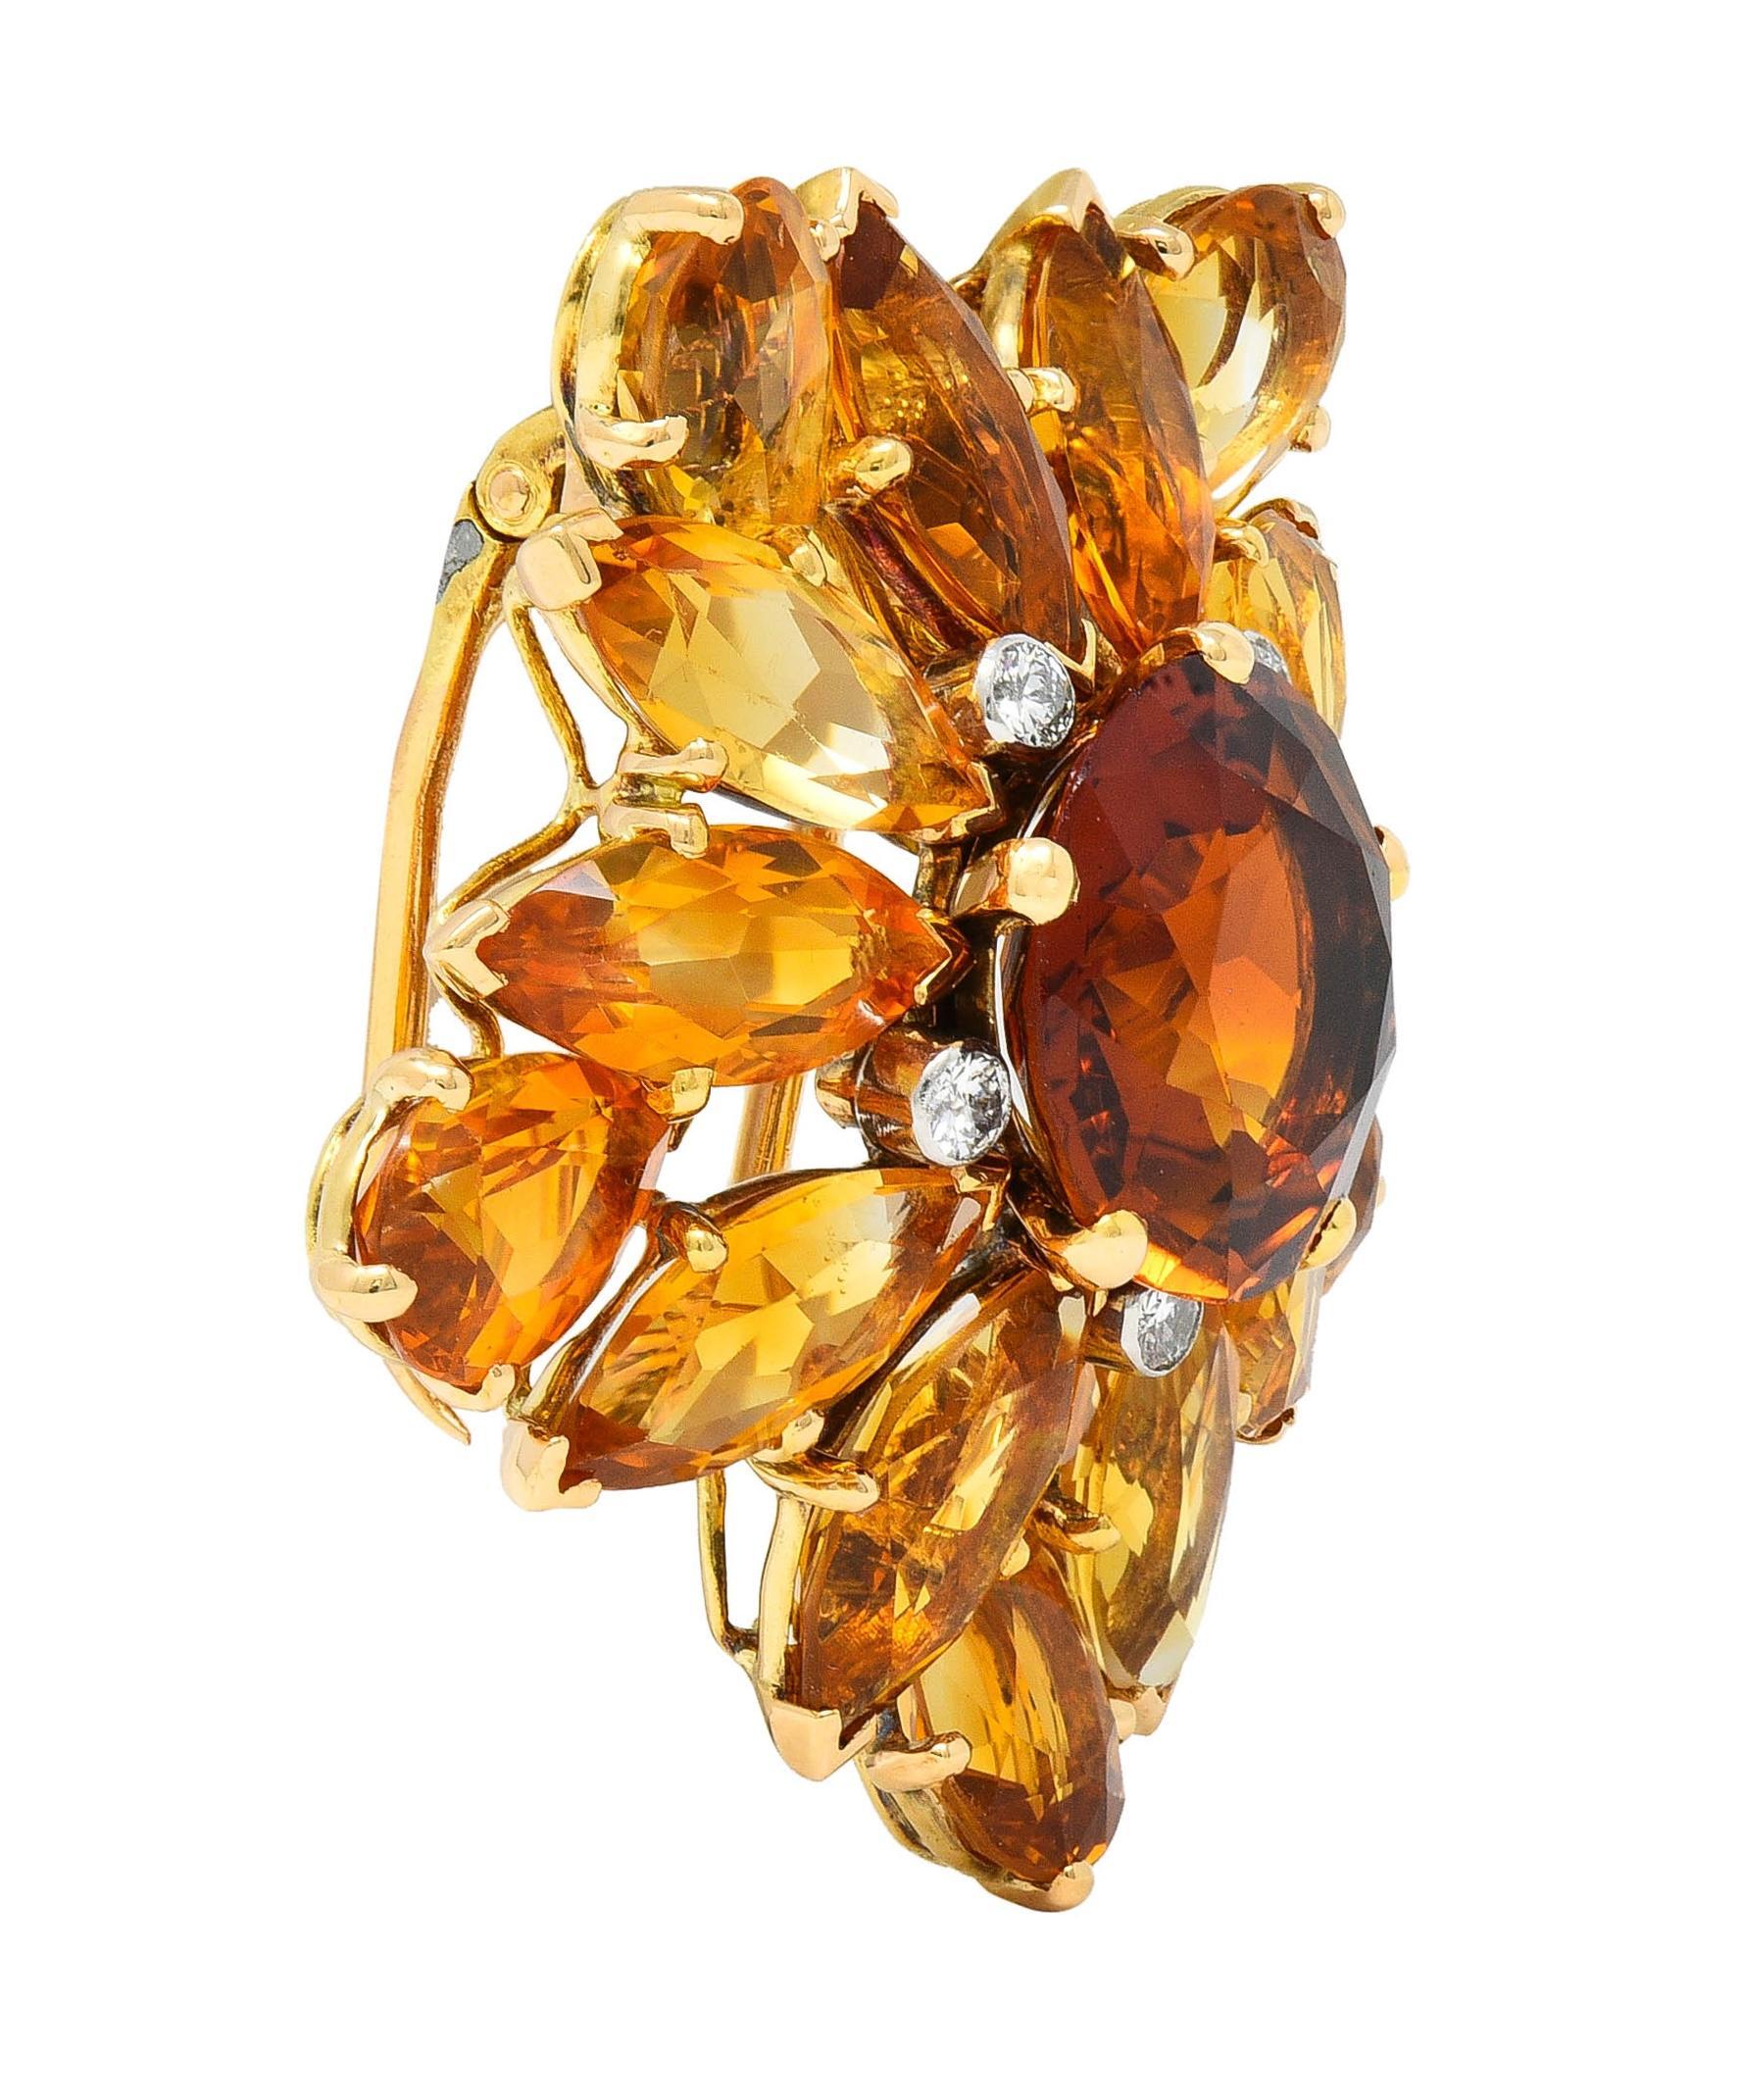 Centering a round cut citrine weighing approximately 5.81 carats - transparent dark brownish orange 
Prong set with a halo surround of round brilliant cut diamonds set in platinum-topped bezels
Weighing approximately 0.30 carat total - eye clean and